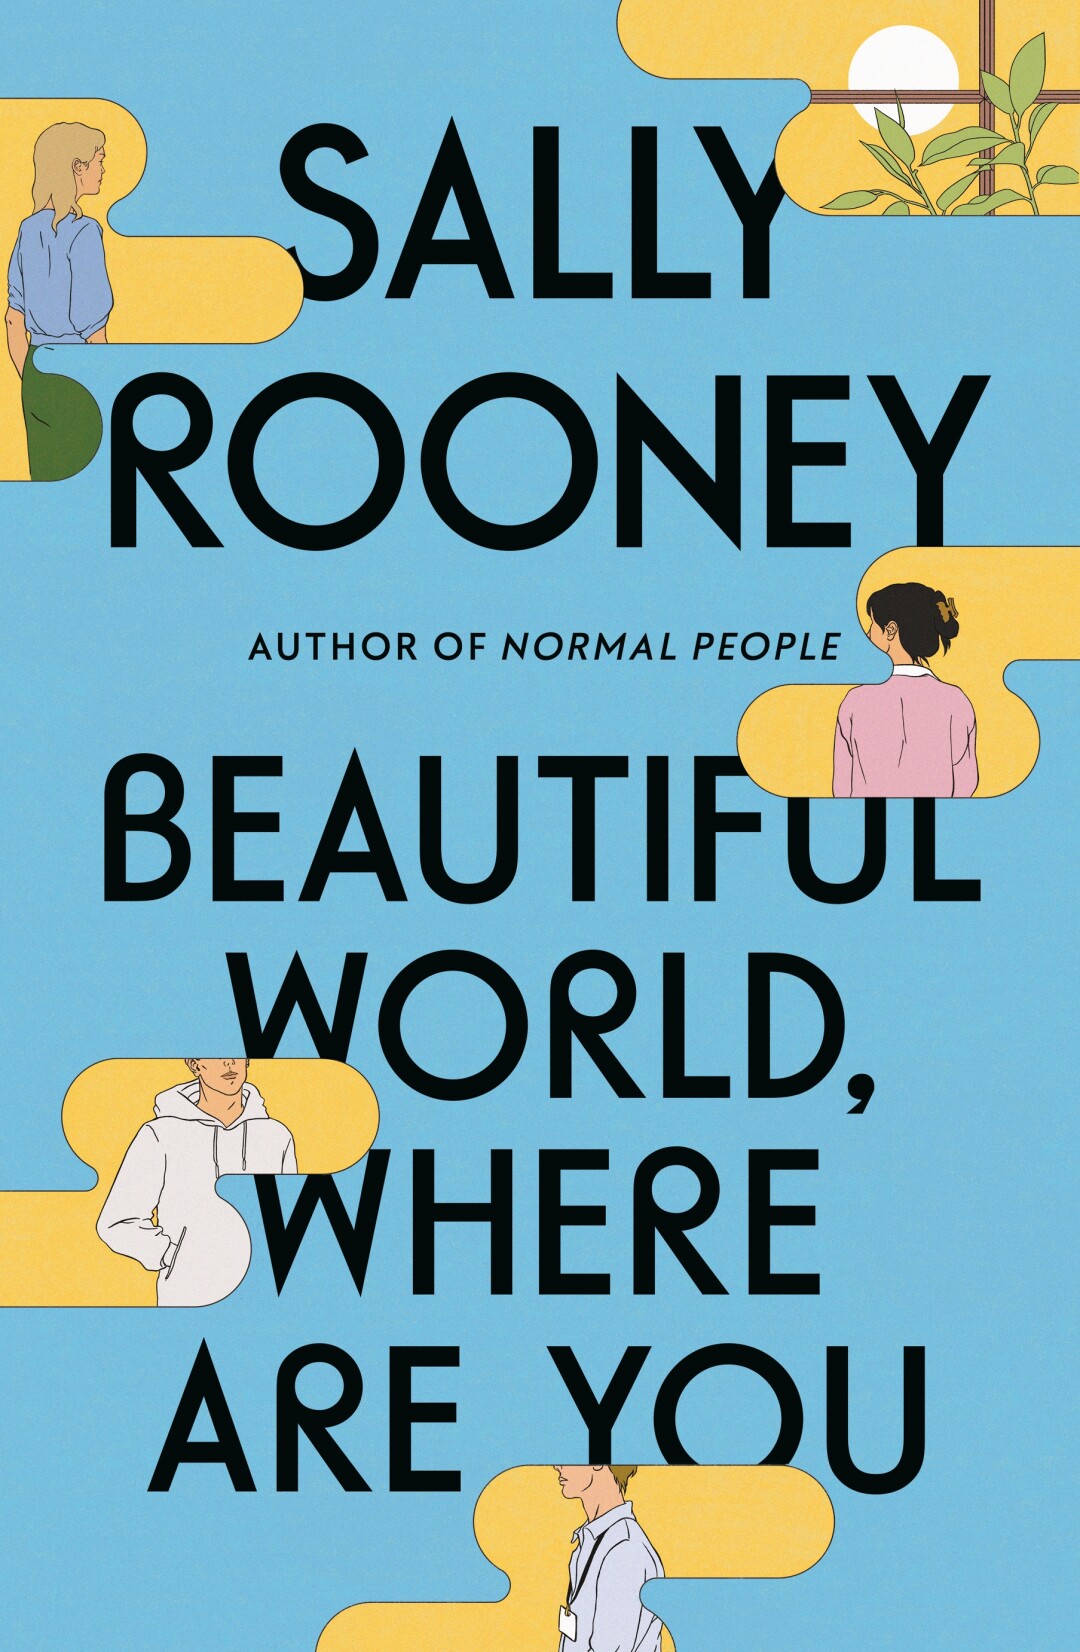 The illustrated cover of "Beautiful people, where are you," by Sally Rooney